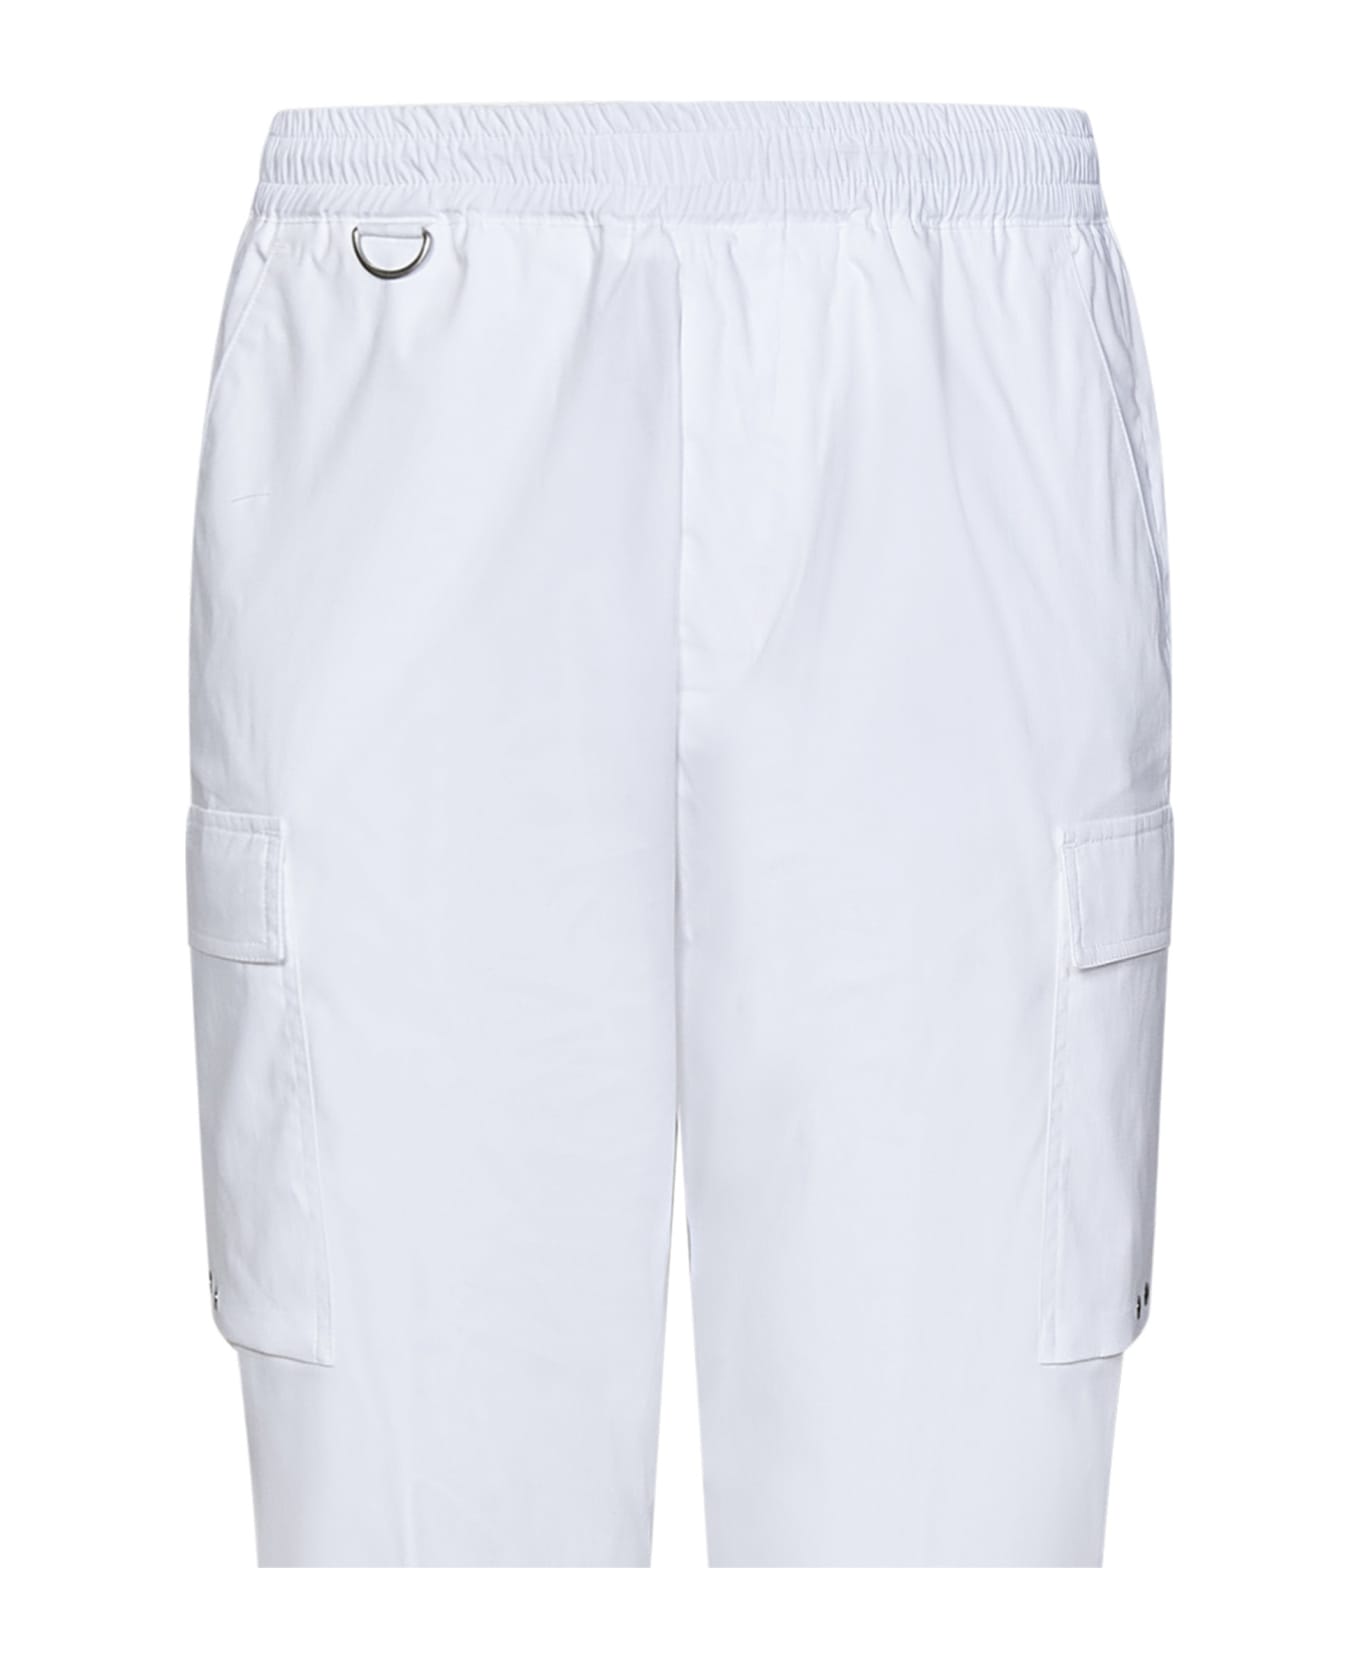 Low Brand Trousers - White ボトムス